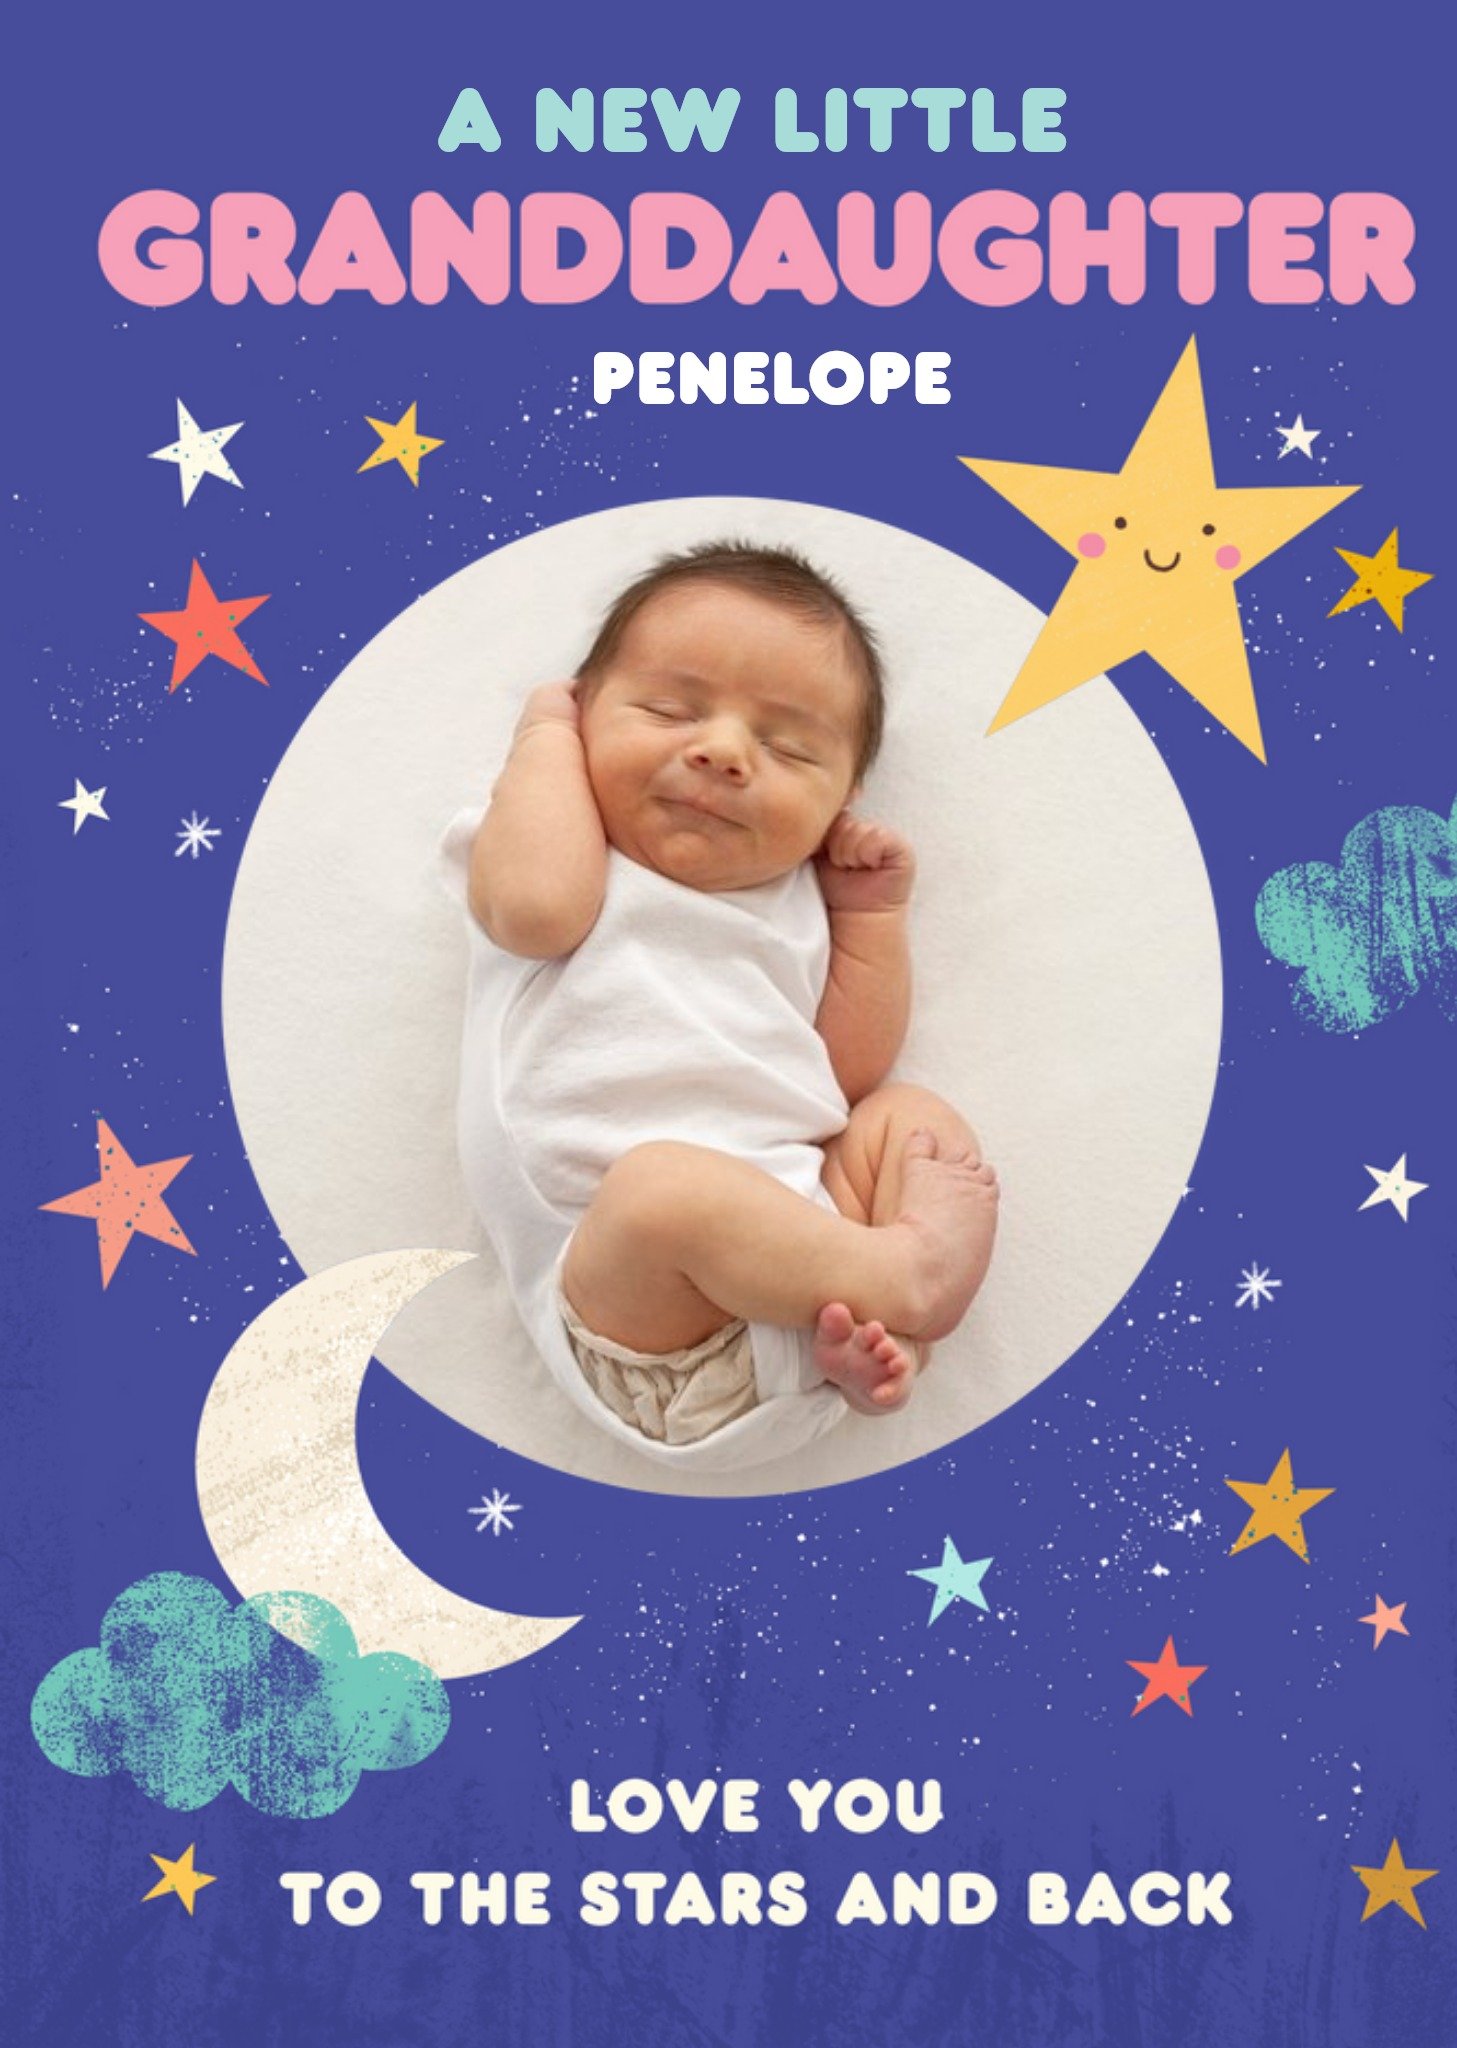 Moonpig Love You To The Stars And Back Cute New Baby Granddaughter Card Ecard